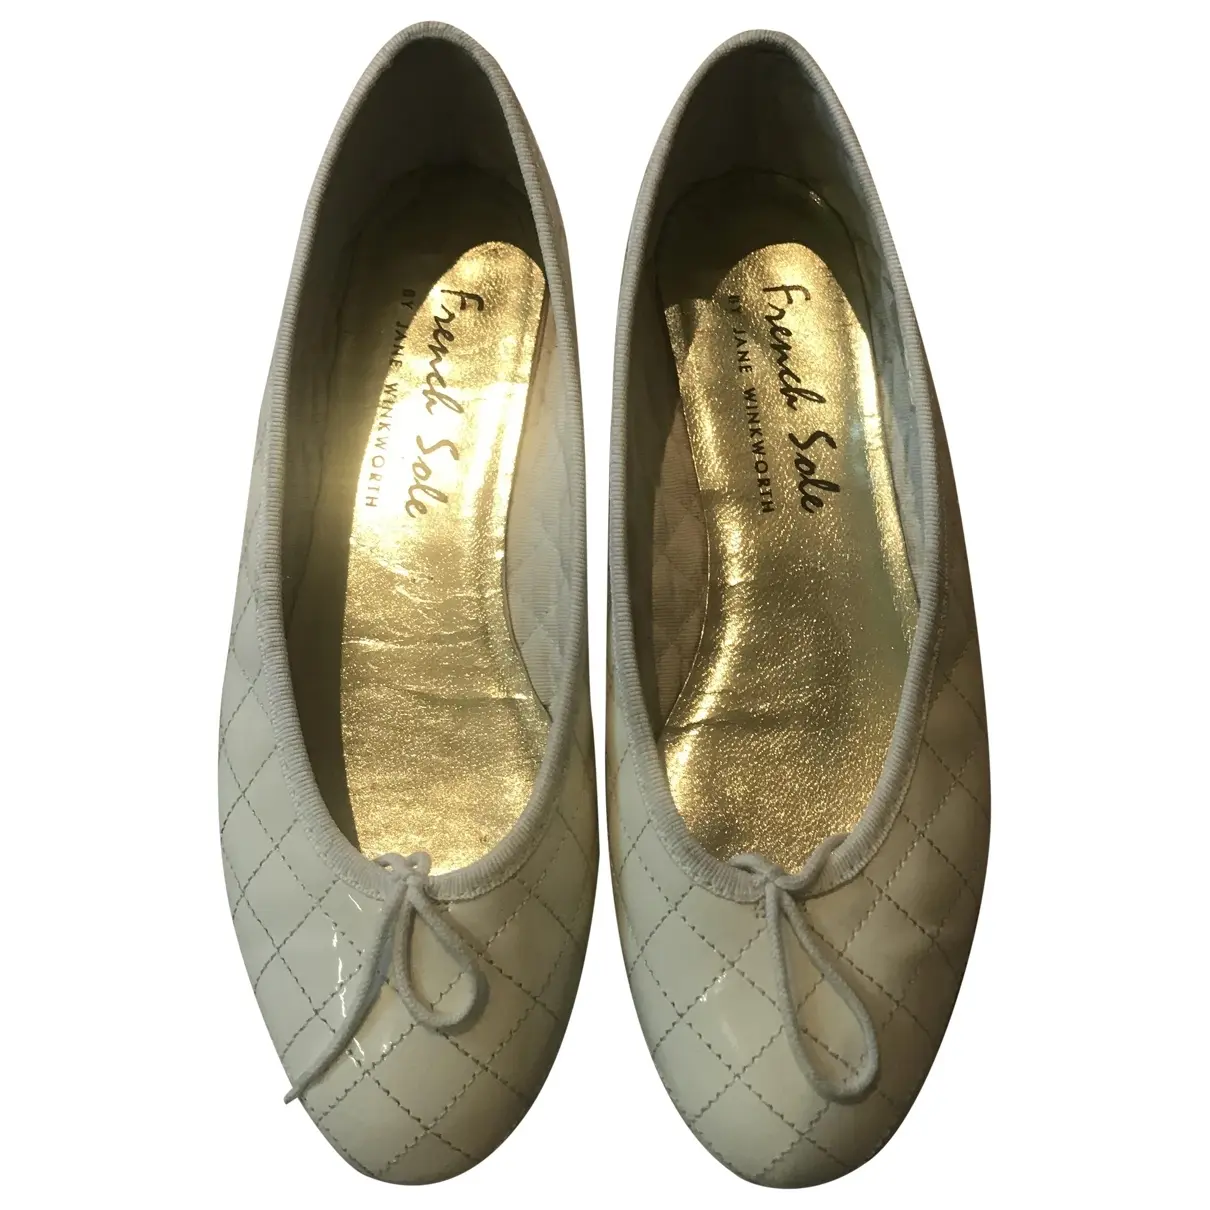 Patent leather ballet flats French Sole